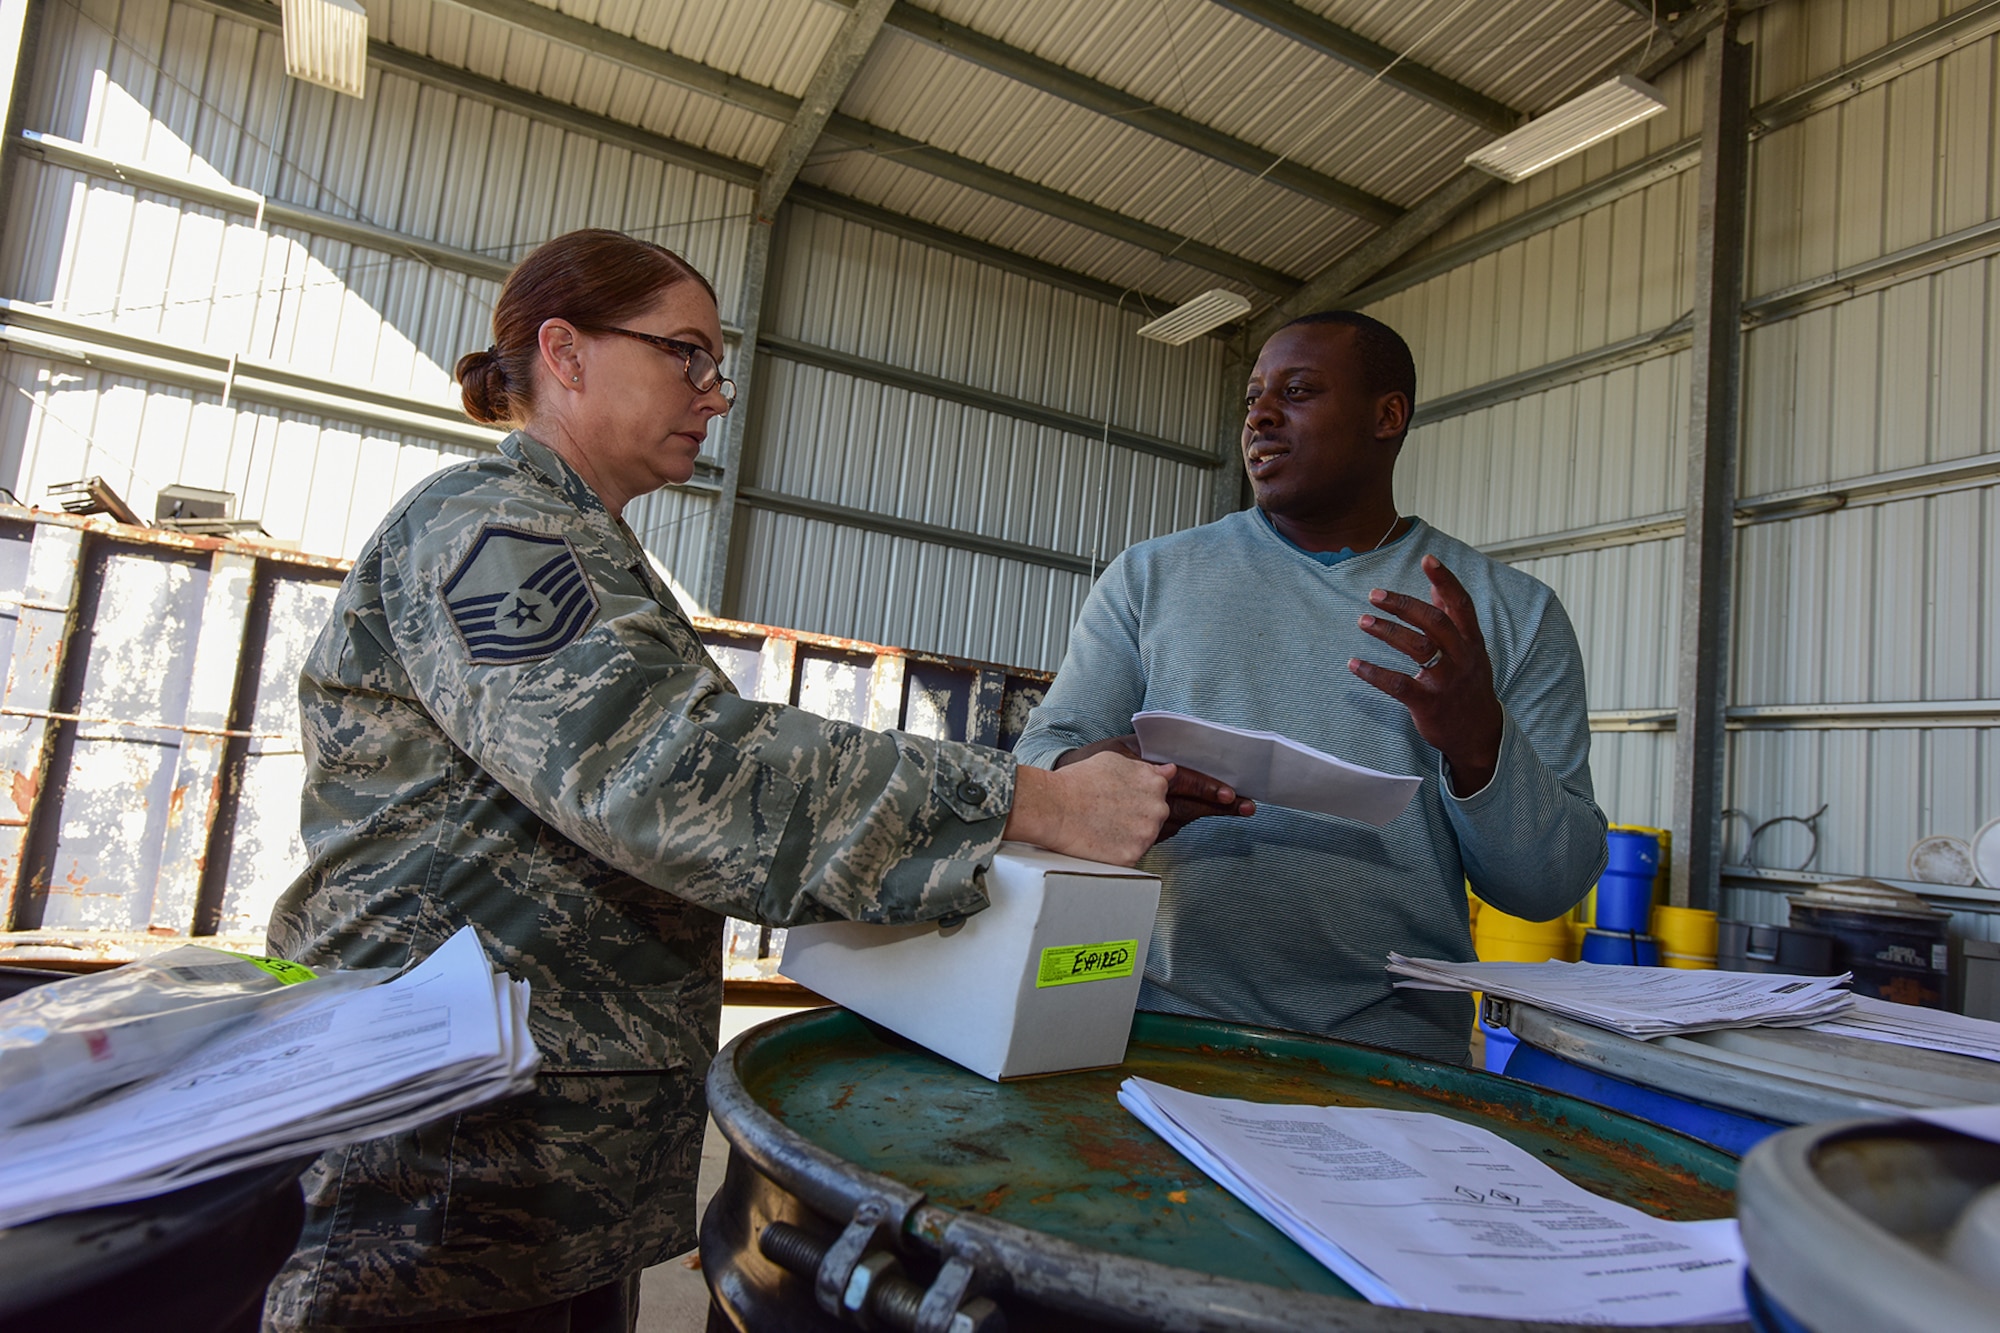 U.S. Air Force Master Sgt. Tabitha Little, a hazmart pharmacy technician assigned to the 169th Logistics Readiness Squadron, drops off materials for disposal at the Central Acquisition Point drop-off center at McEntire Joint National Guard Base, S.C., Nov. 16, 2017. This is one of the programs that the 169th Fighter Wing at McEntire offers in order to assist in keeping the community clean by recycling excess materials. (U.S. Air National Guard photo by Senior Airman Megan Floyd)